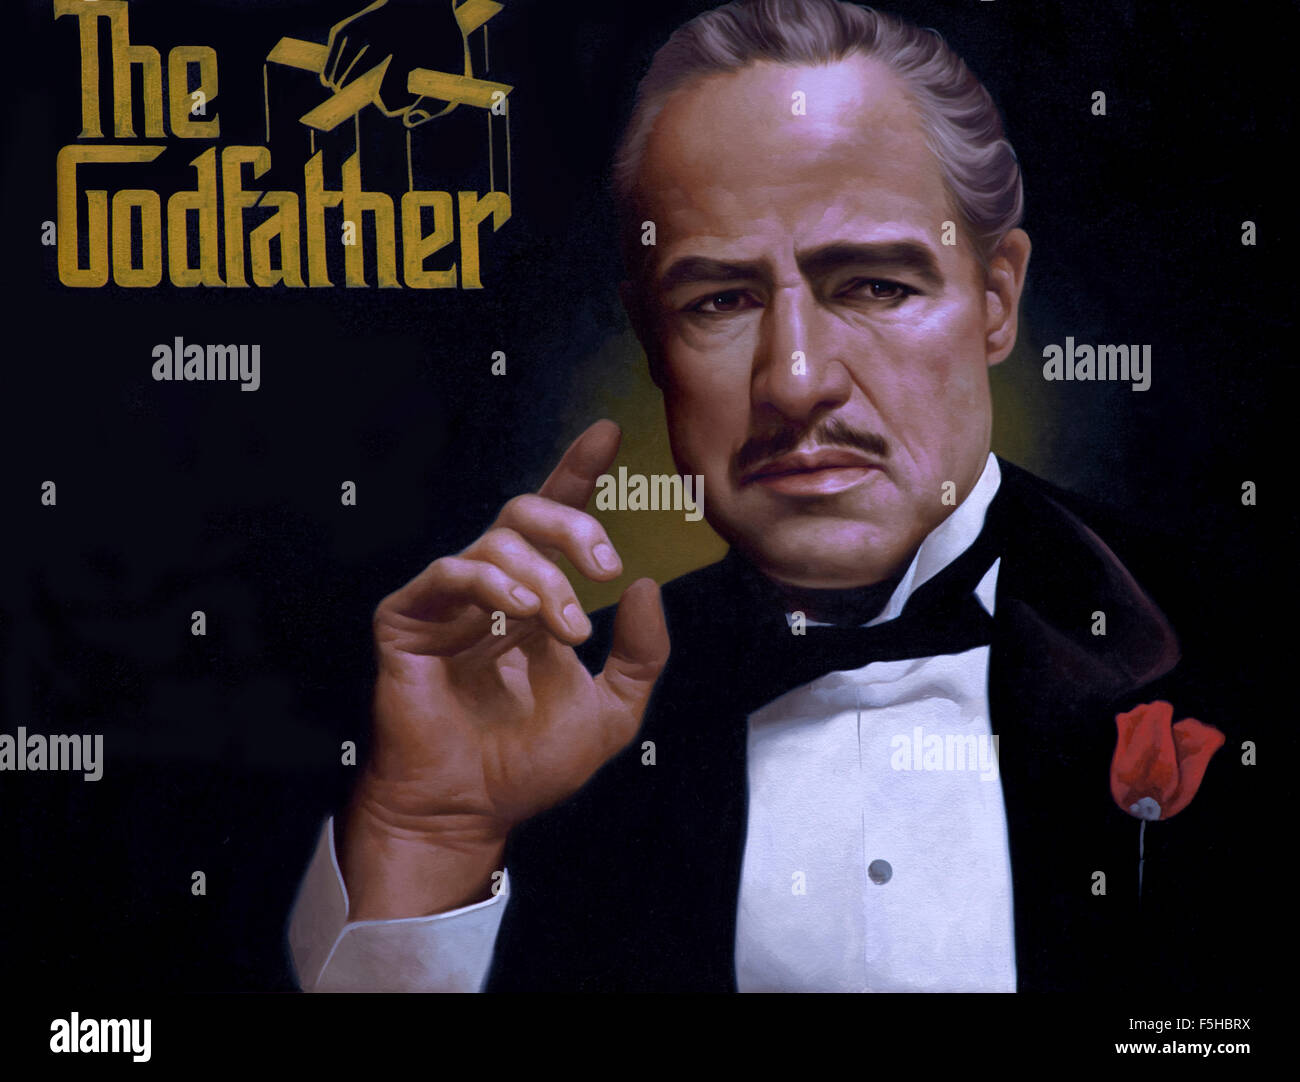 The Godfather. Painting of Marlon Brando in the role of Vito Corleone, Stock Photo